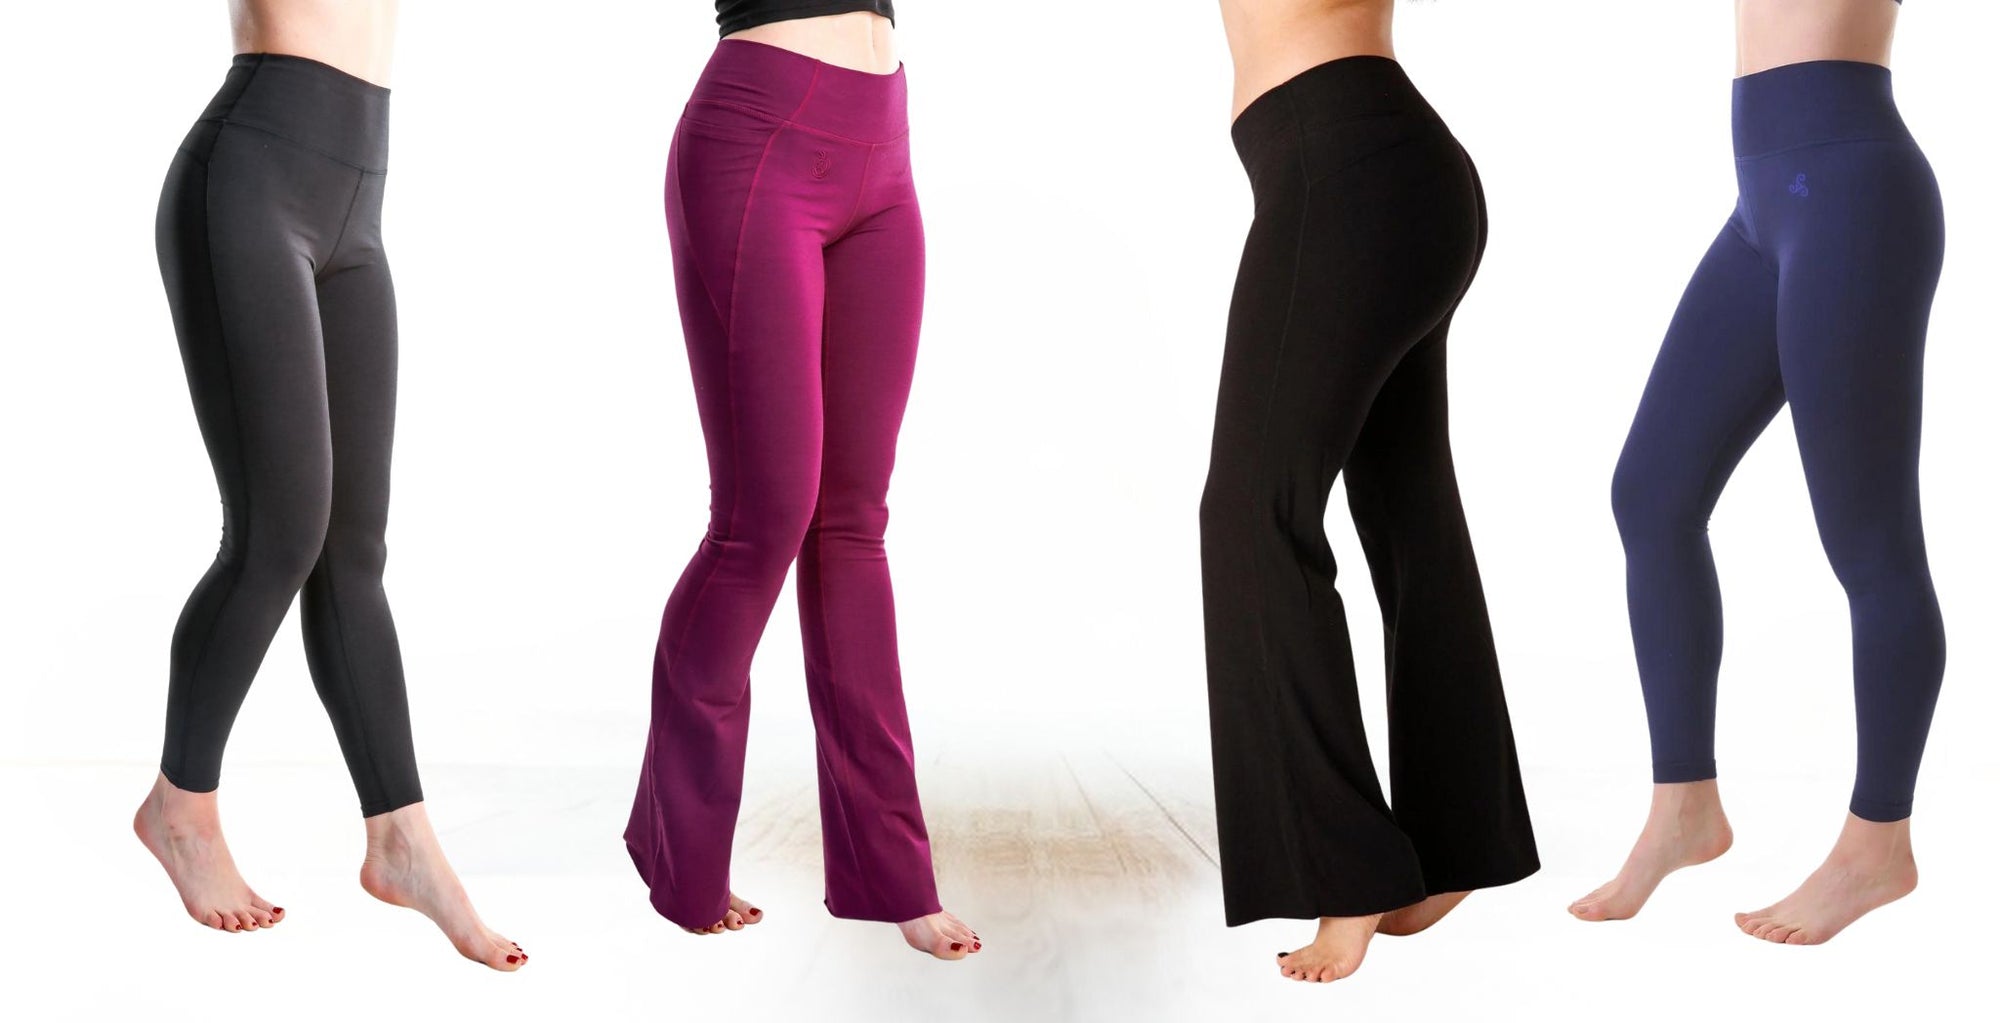 What To Wear for Yoga - Guide to Choose Yoga Outfit